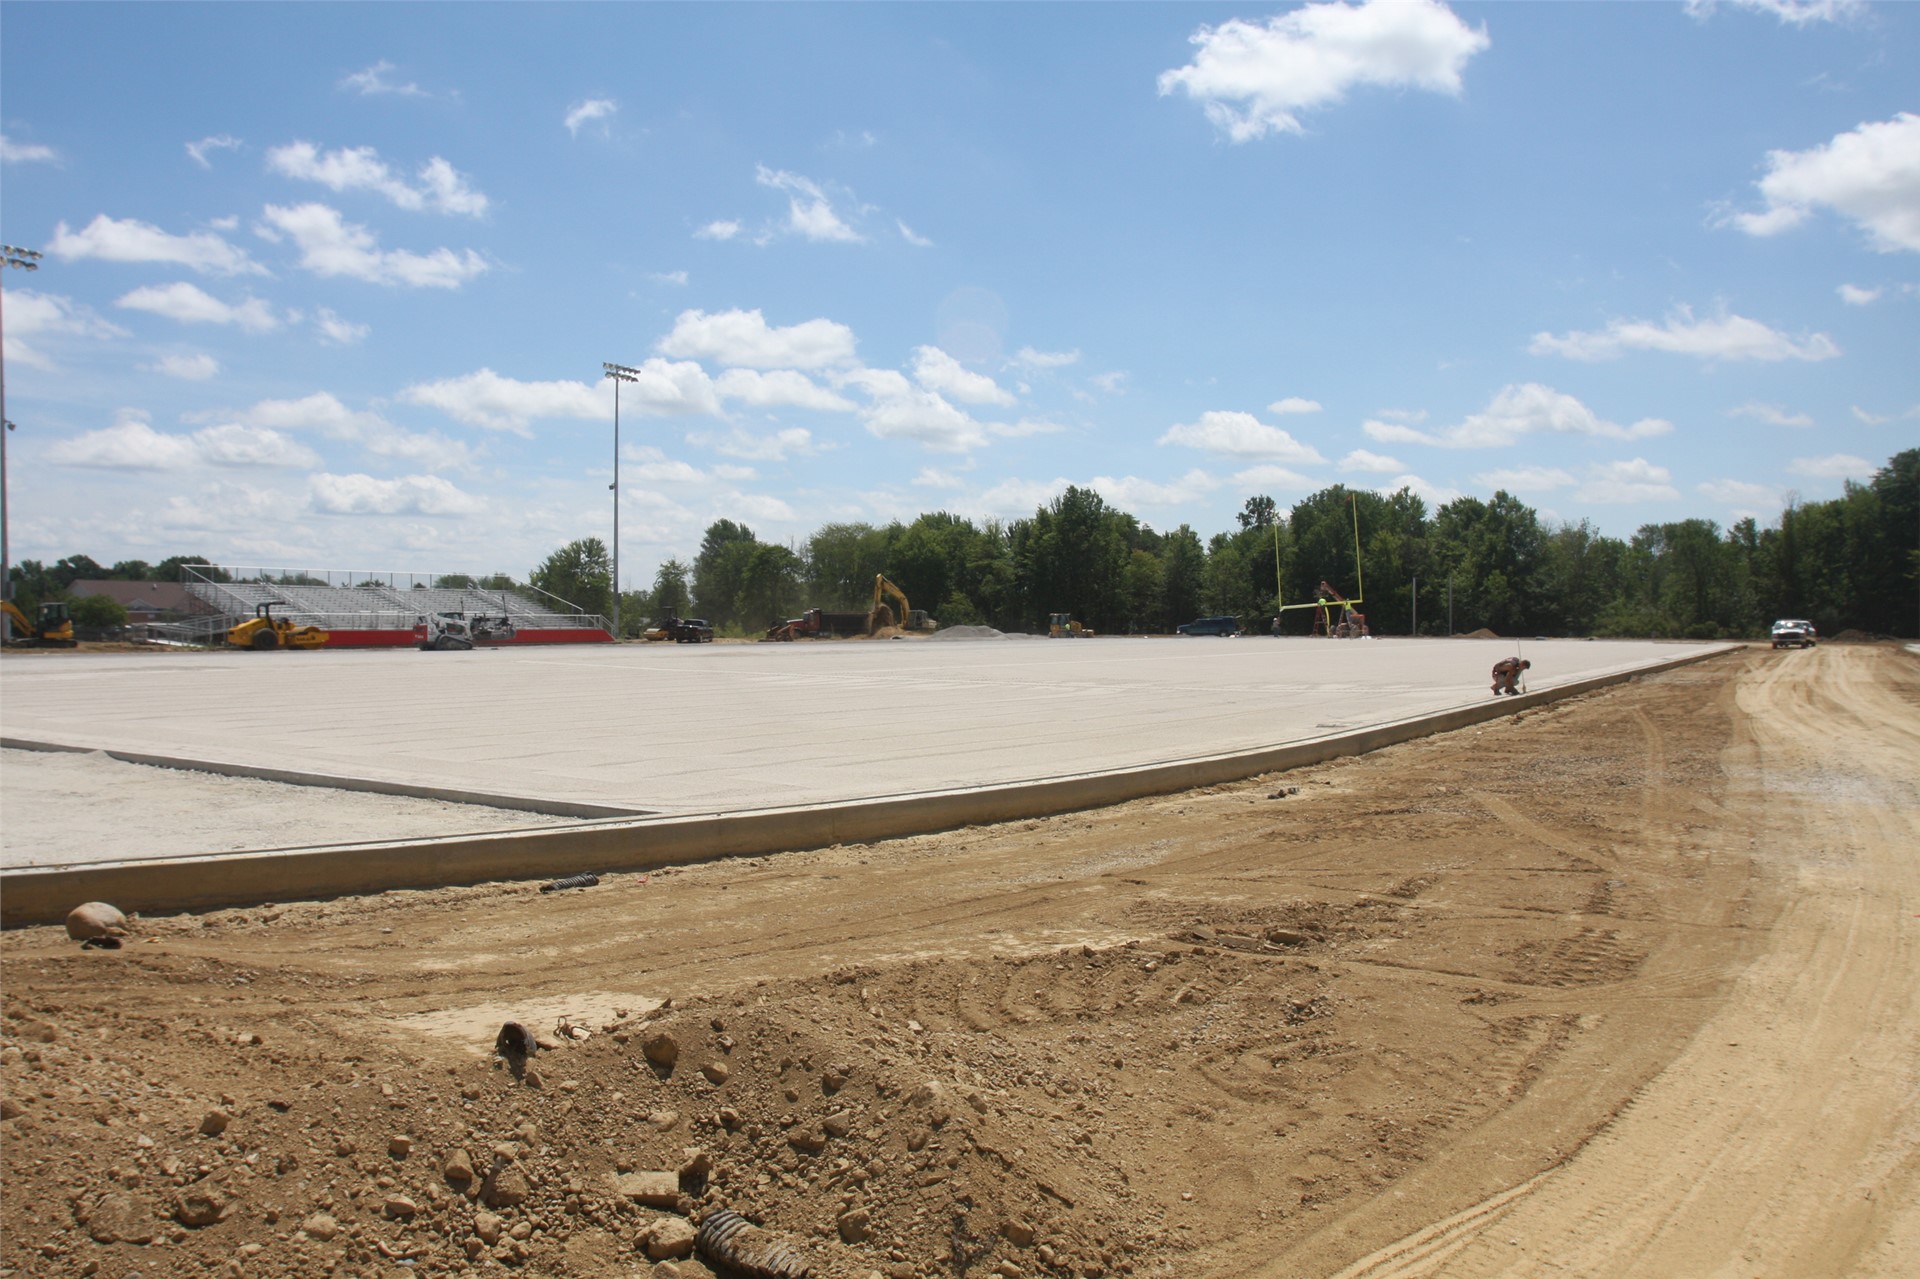 The field is being prepared for turf